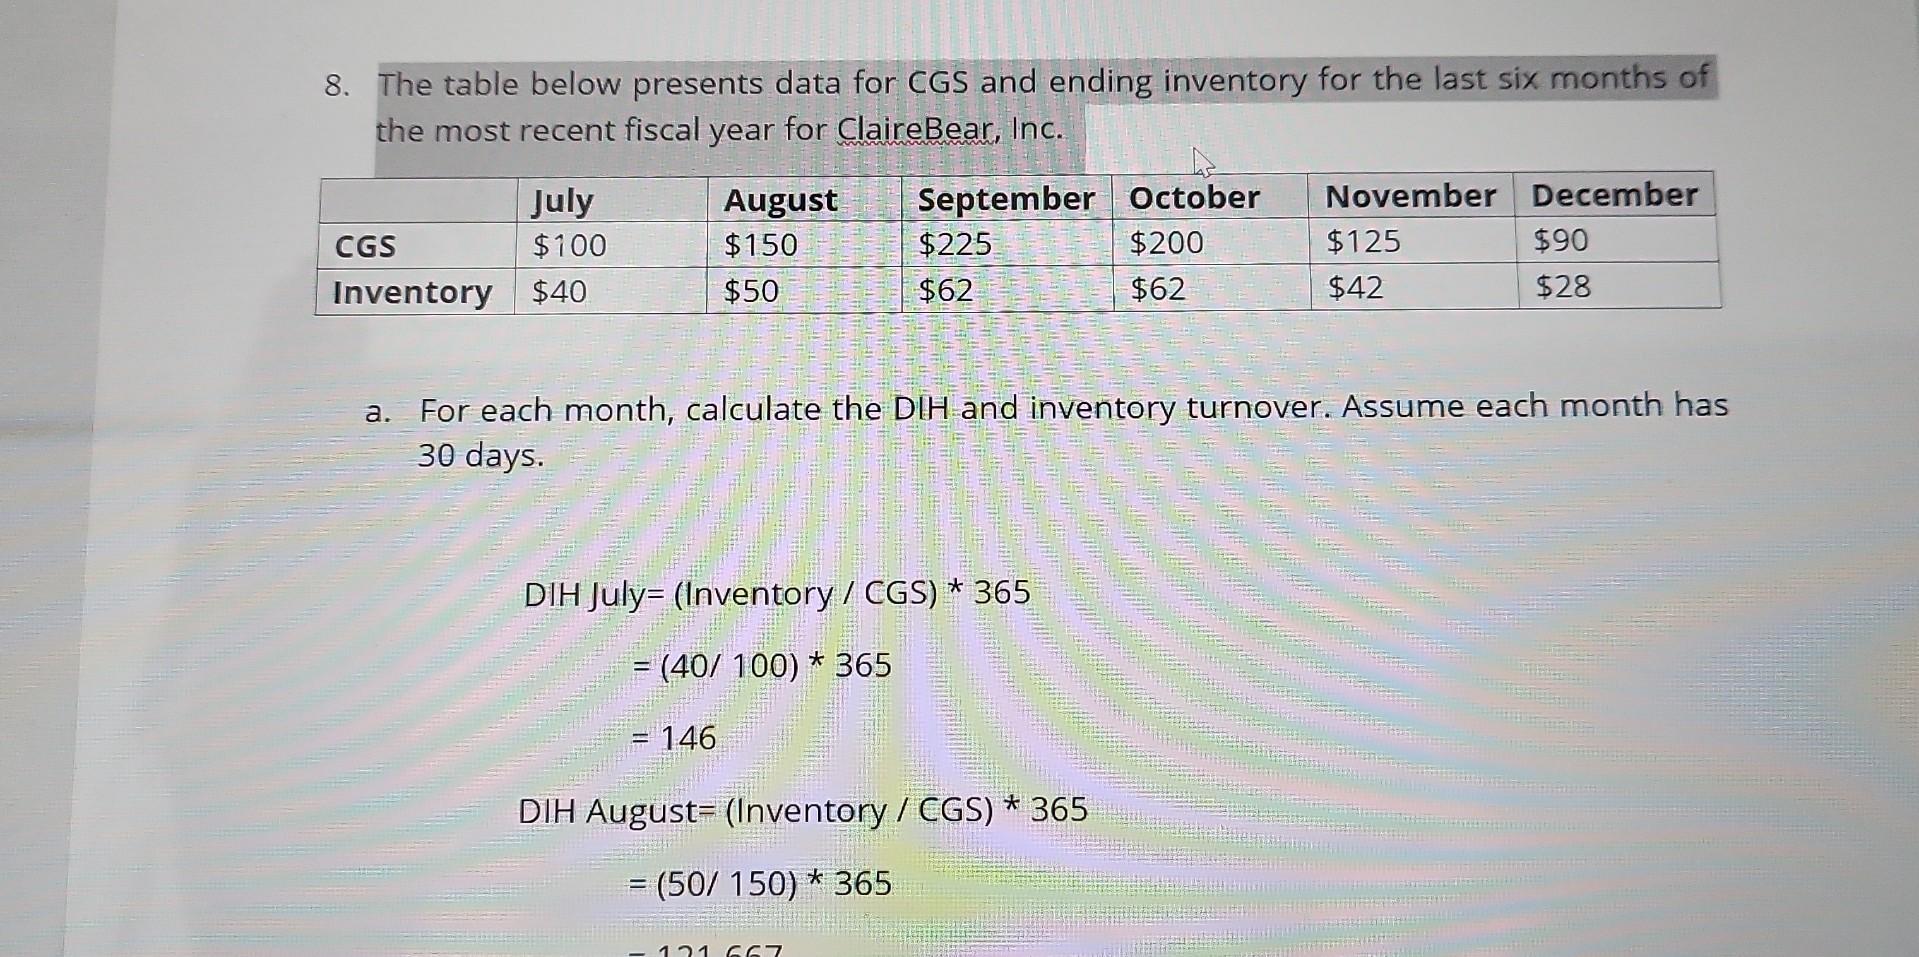 8. The table below presents data for CGS and ending inventory for the last six months of the most recent fiscal year for Clai